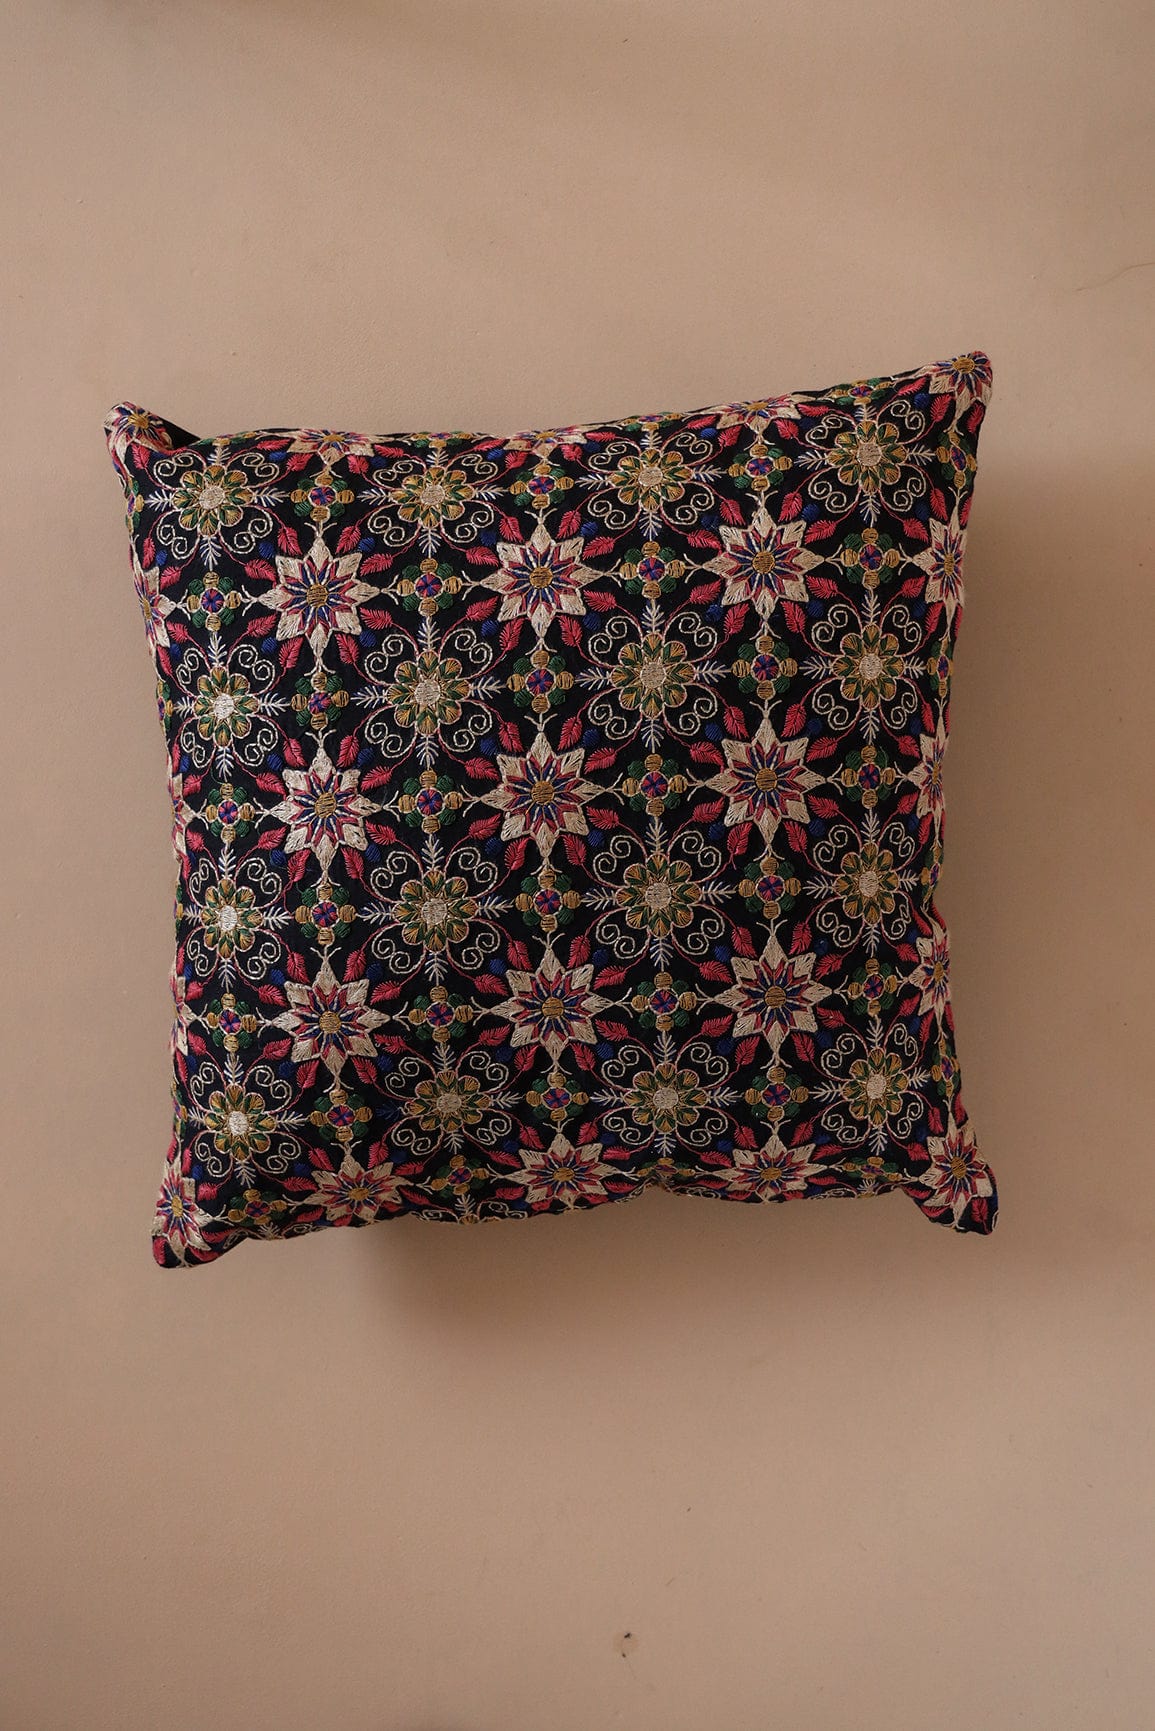 Elegant Floral Embroidery on Black cotton Cushion Cover (16*16 inches) - doeraa